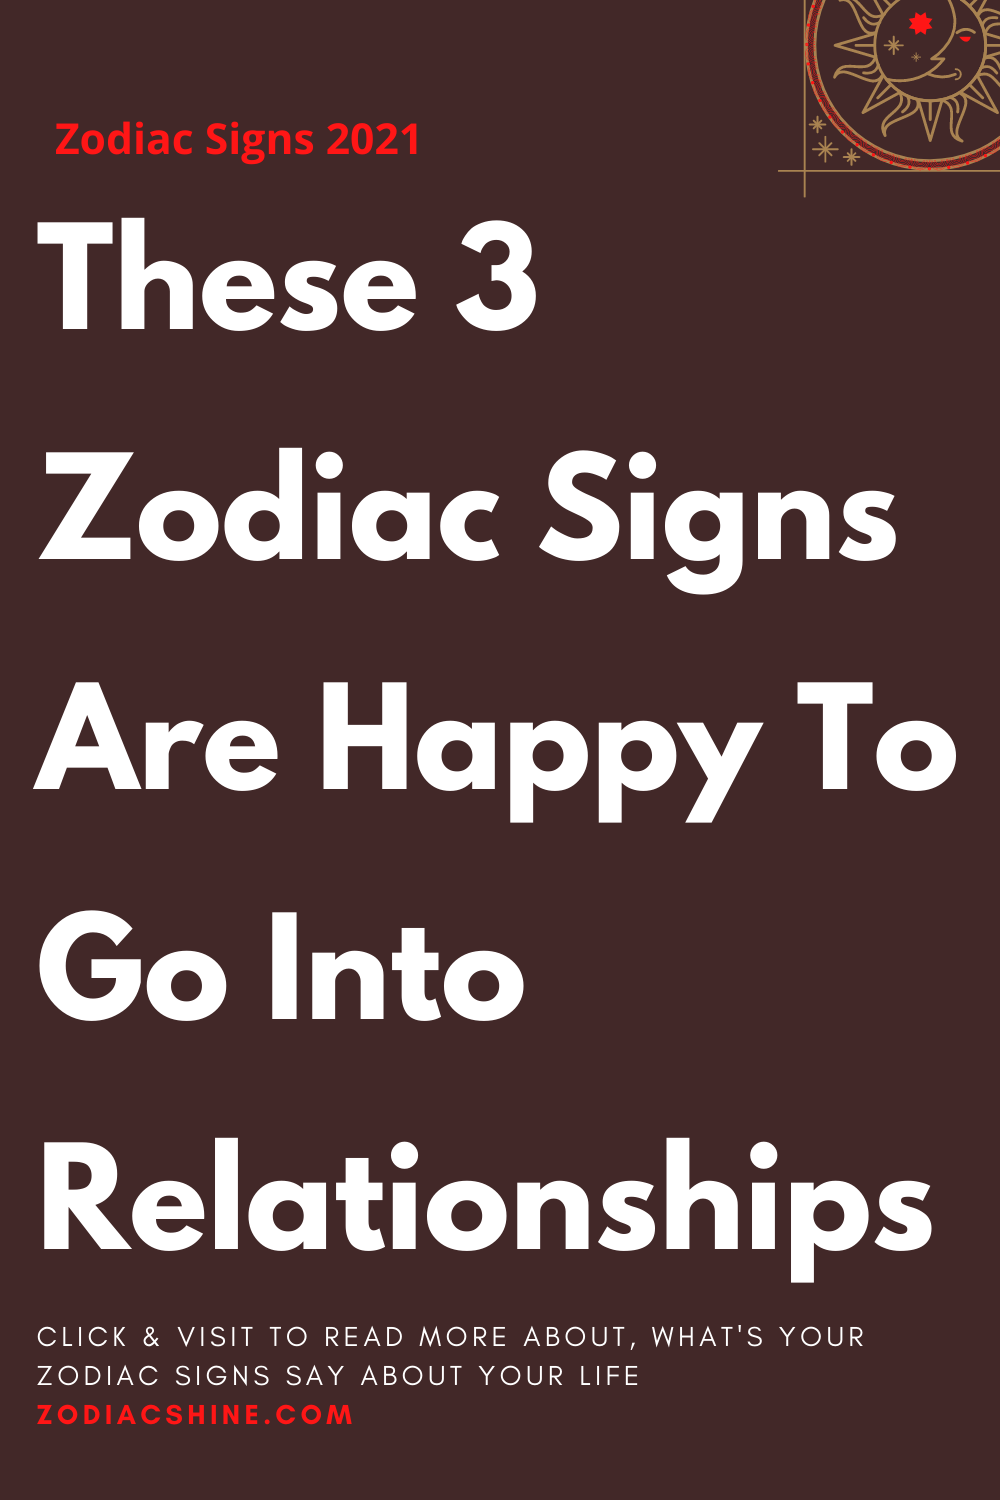 These 3 Zodiac Signs Are Happy To Go Into Relationships